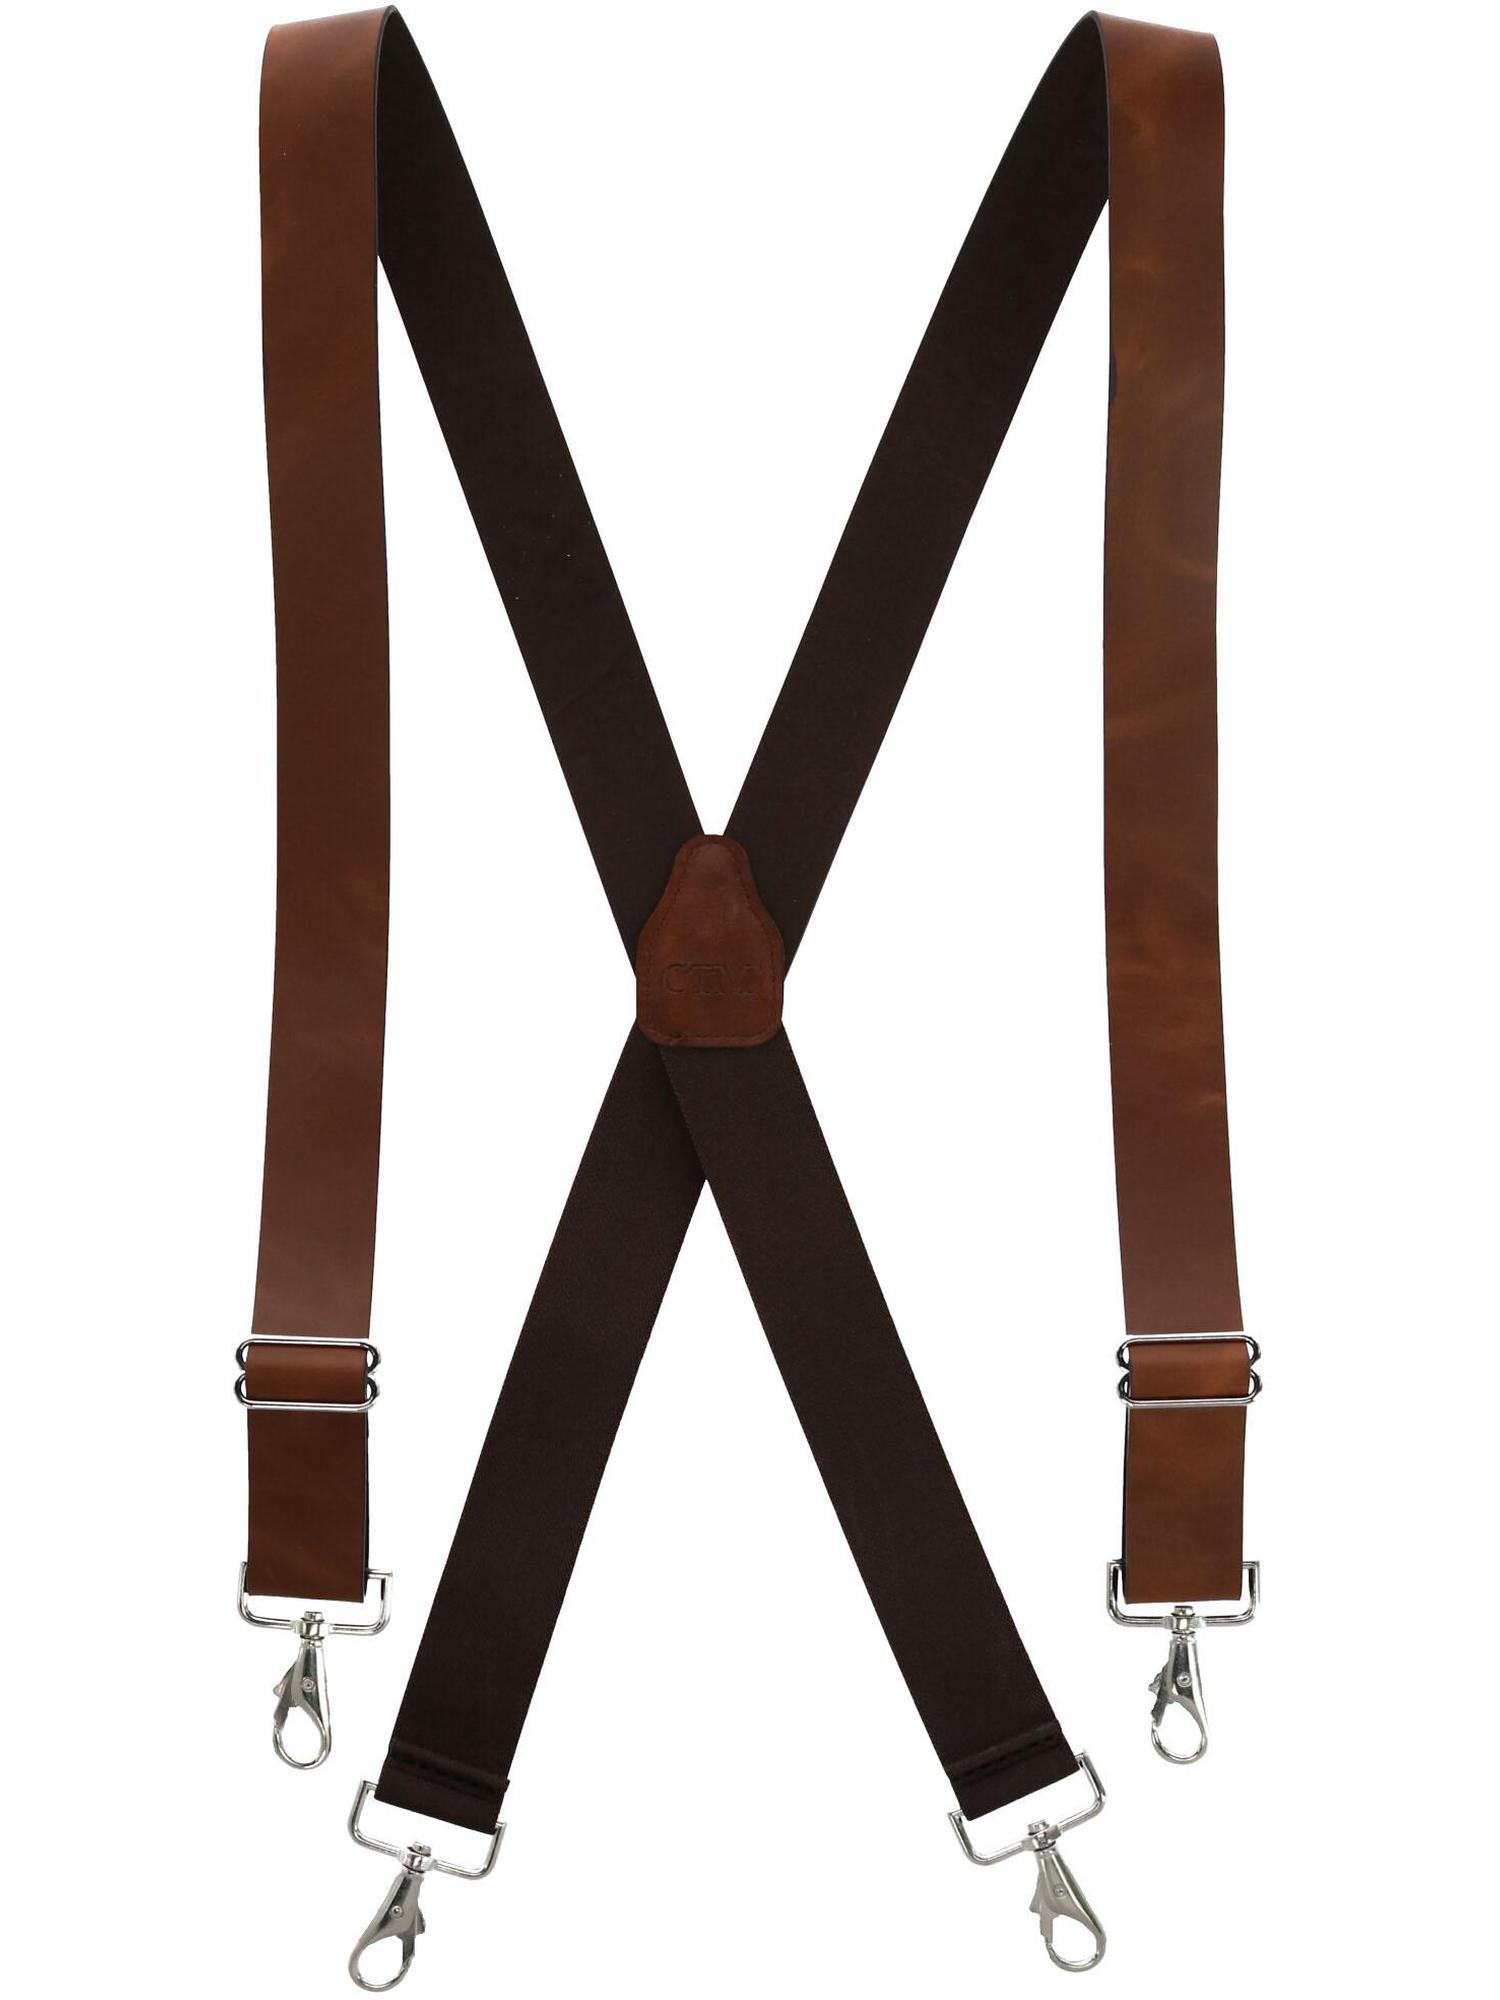 CTM  Wide Leather Suspenders with Swivel Hook Ends (Men Big & Tall) - image 1 of 4